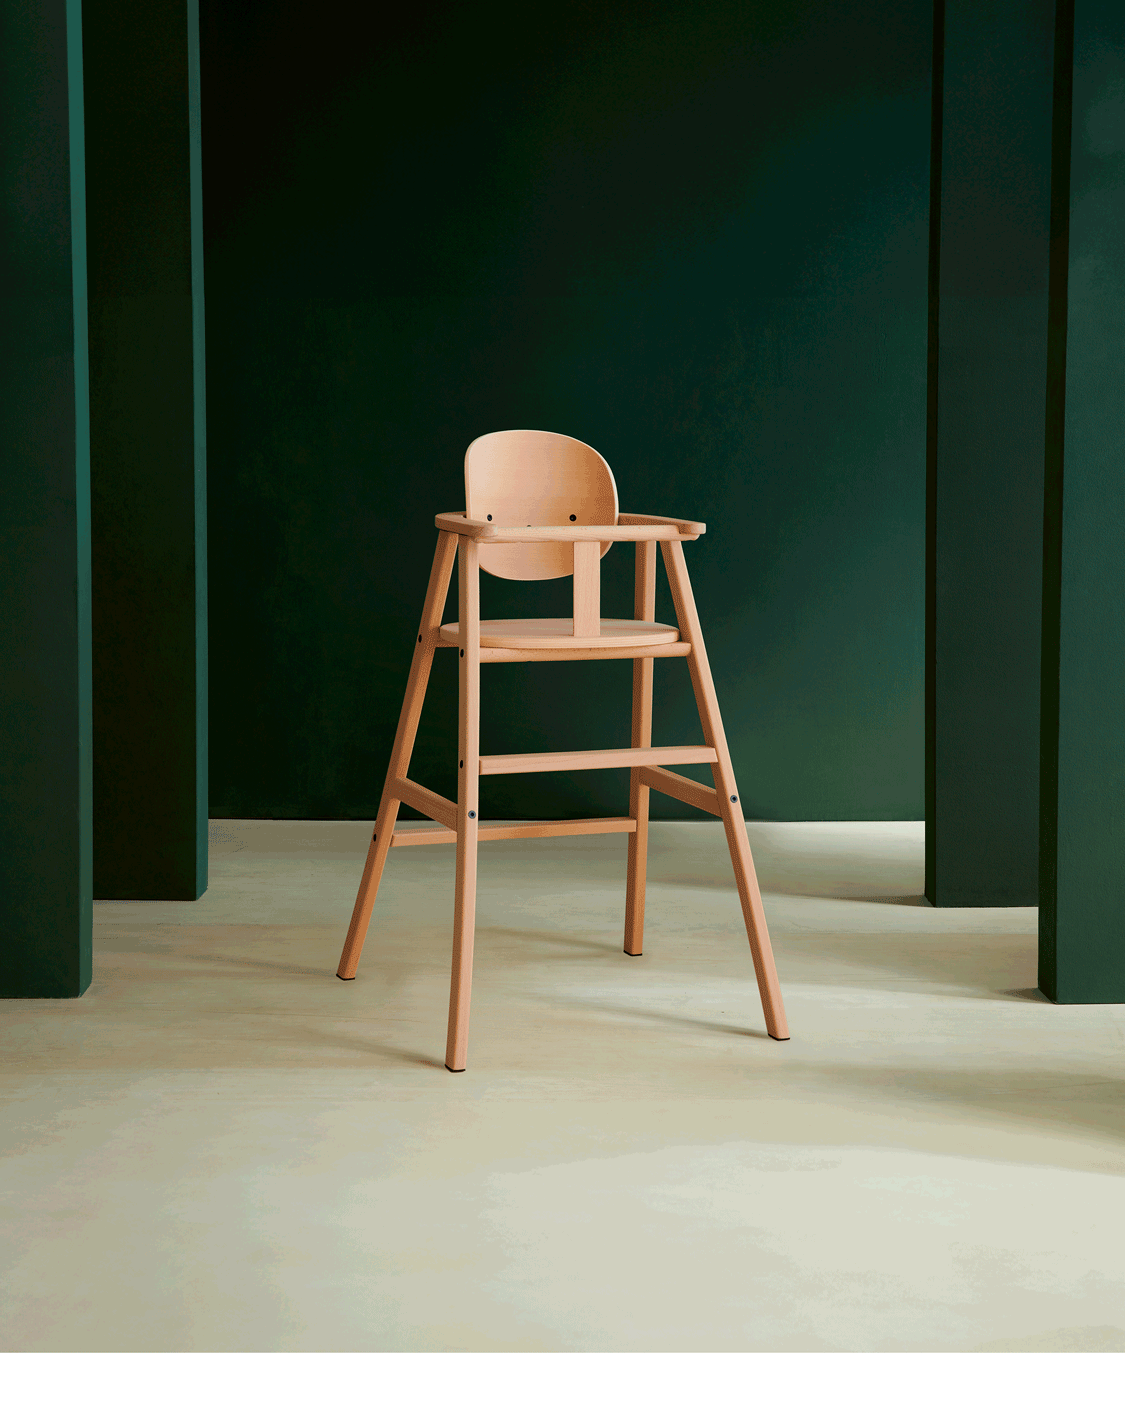 Nobodinoz Growing Green High Chair: 1 product, 2 chairs, 3 positions